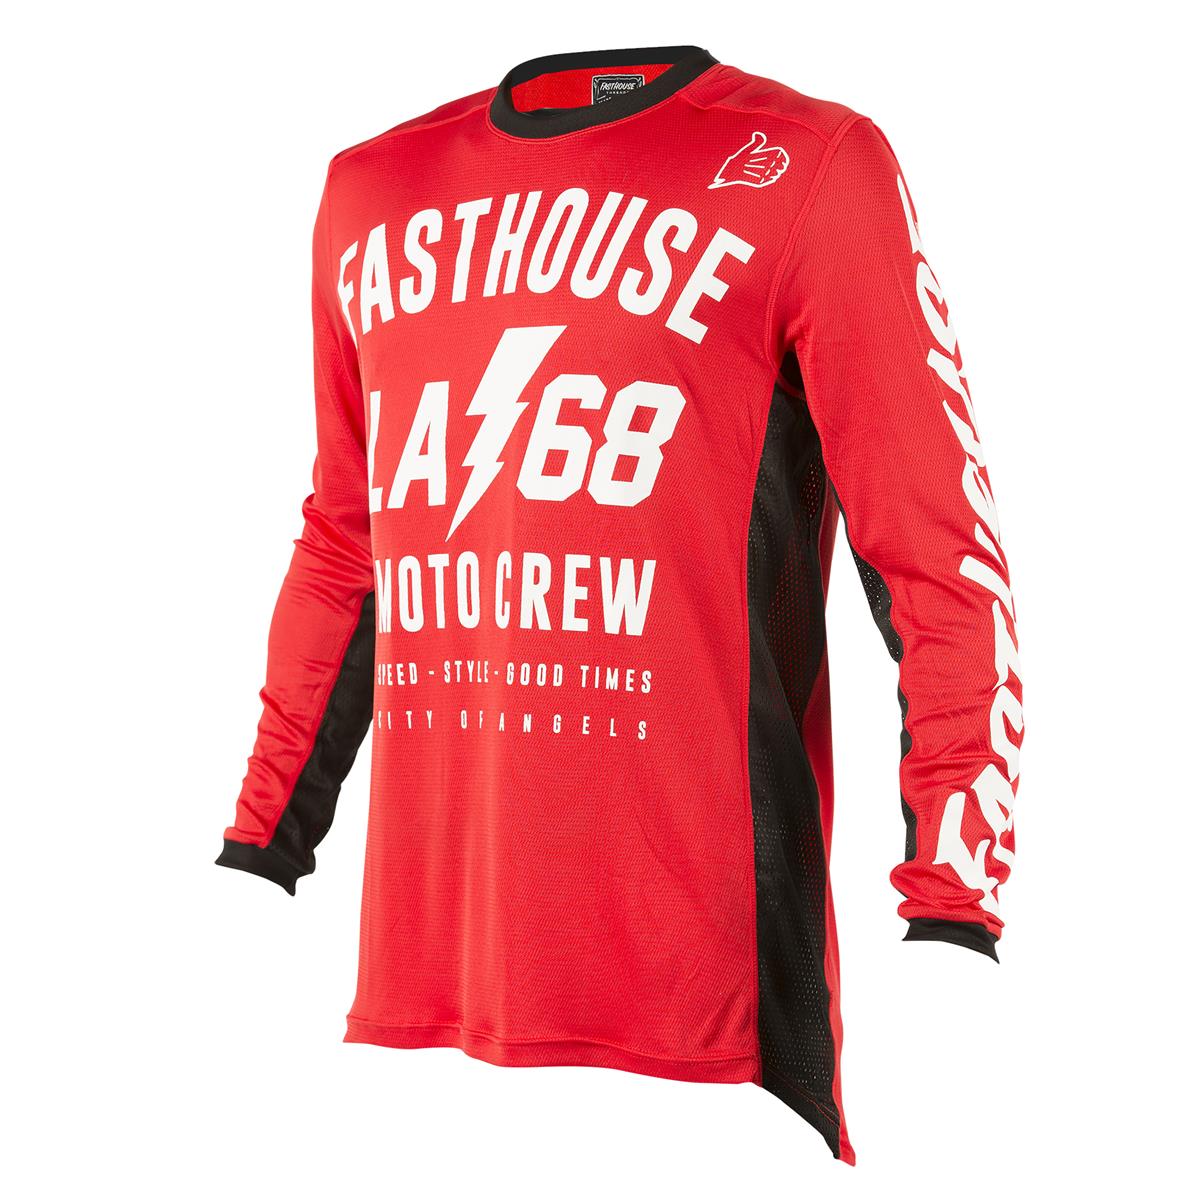 Fasthouse Jersey LA 68 Red